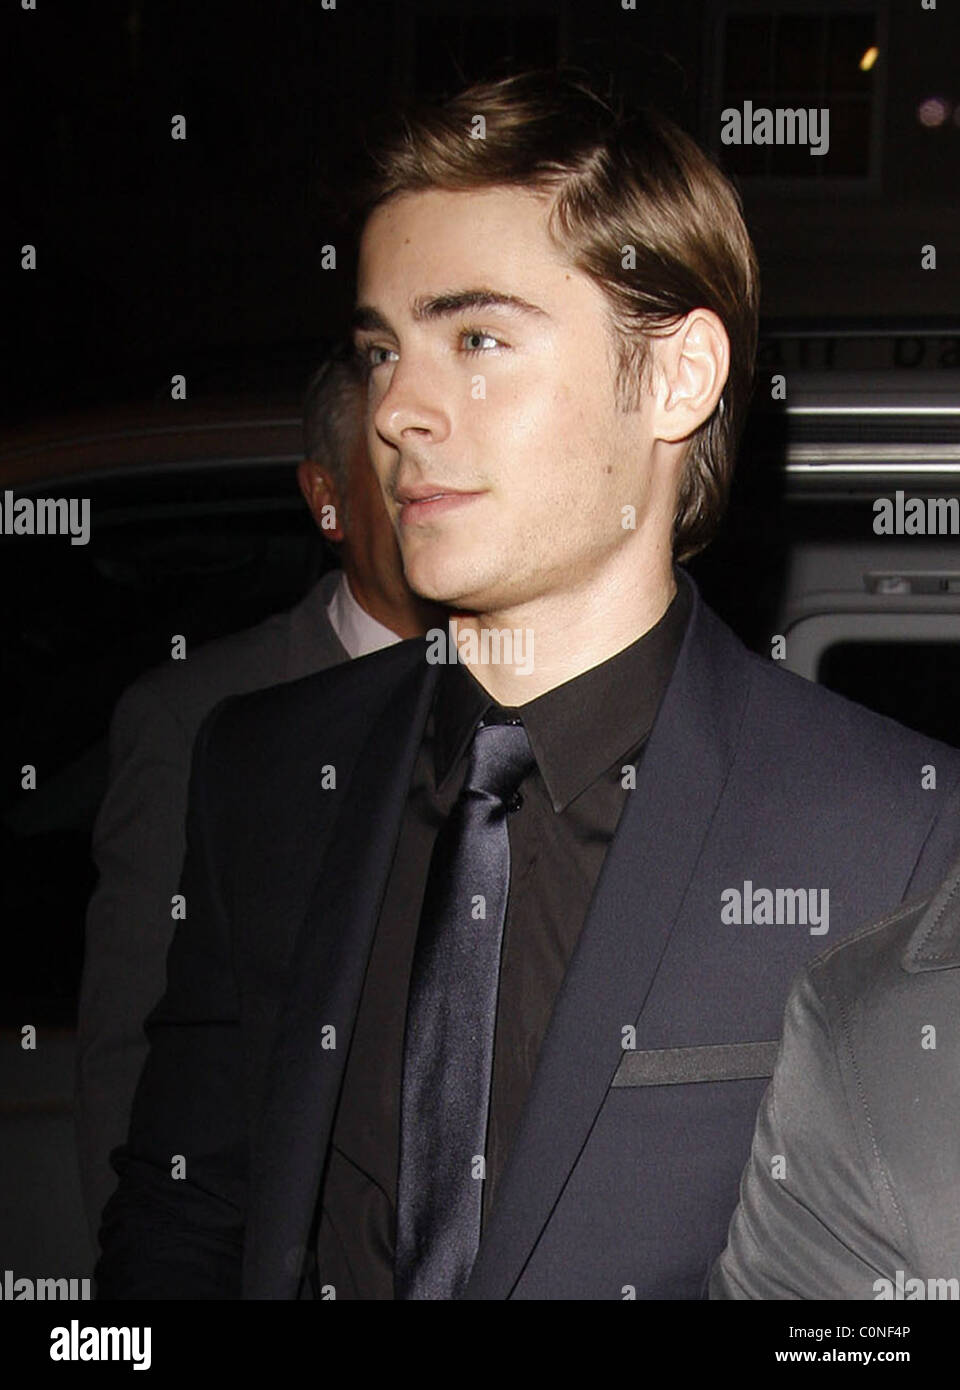 Zac Efron leaving Nobu resturant via the back door following the 'High School Musical 3' premiere afterparty London, England - Stock Photo